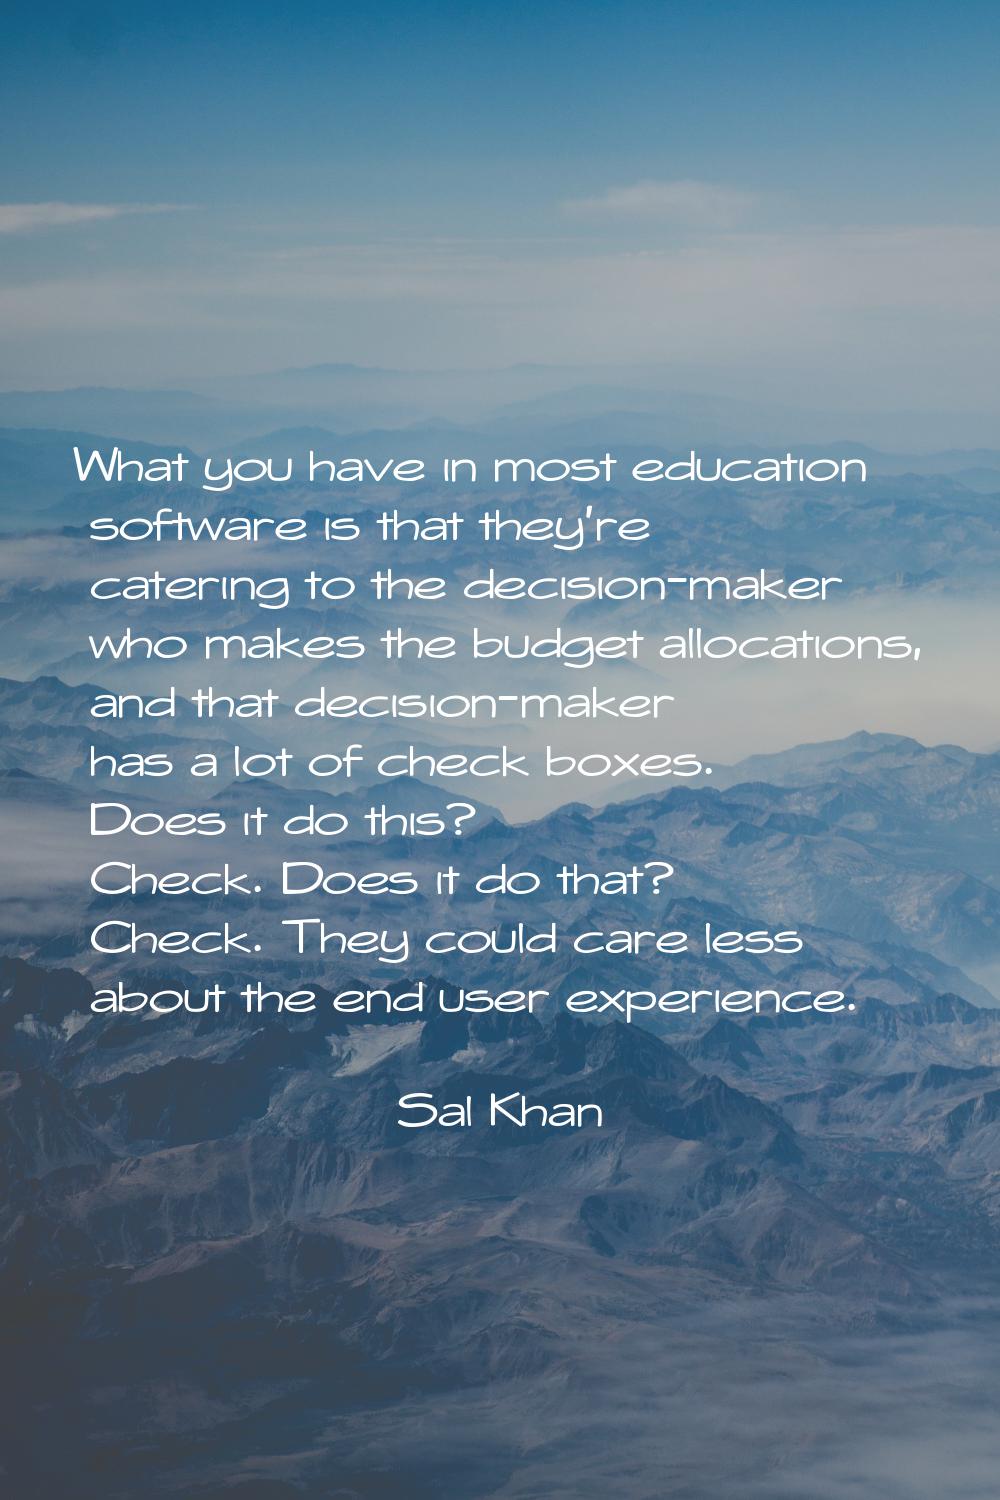 What you have in most education software is that they're catering to the decision-maker who makes t